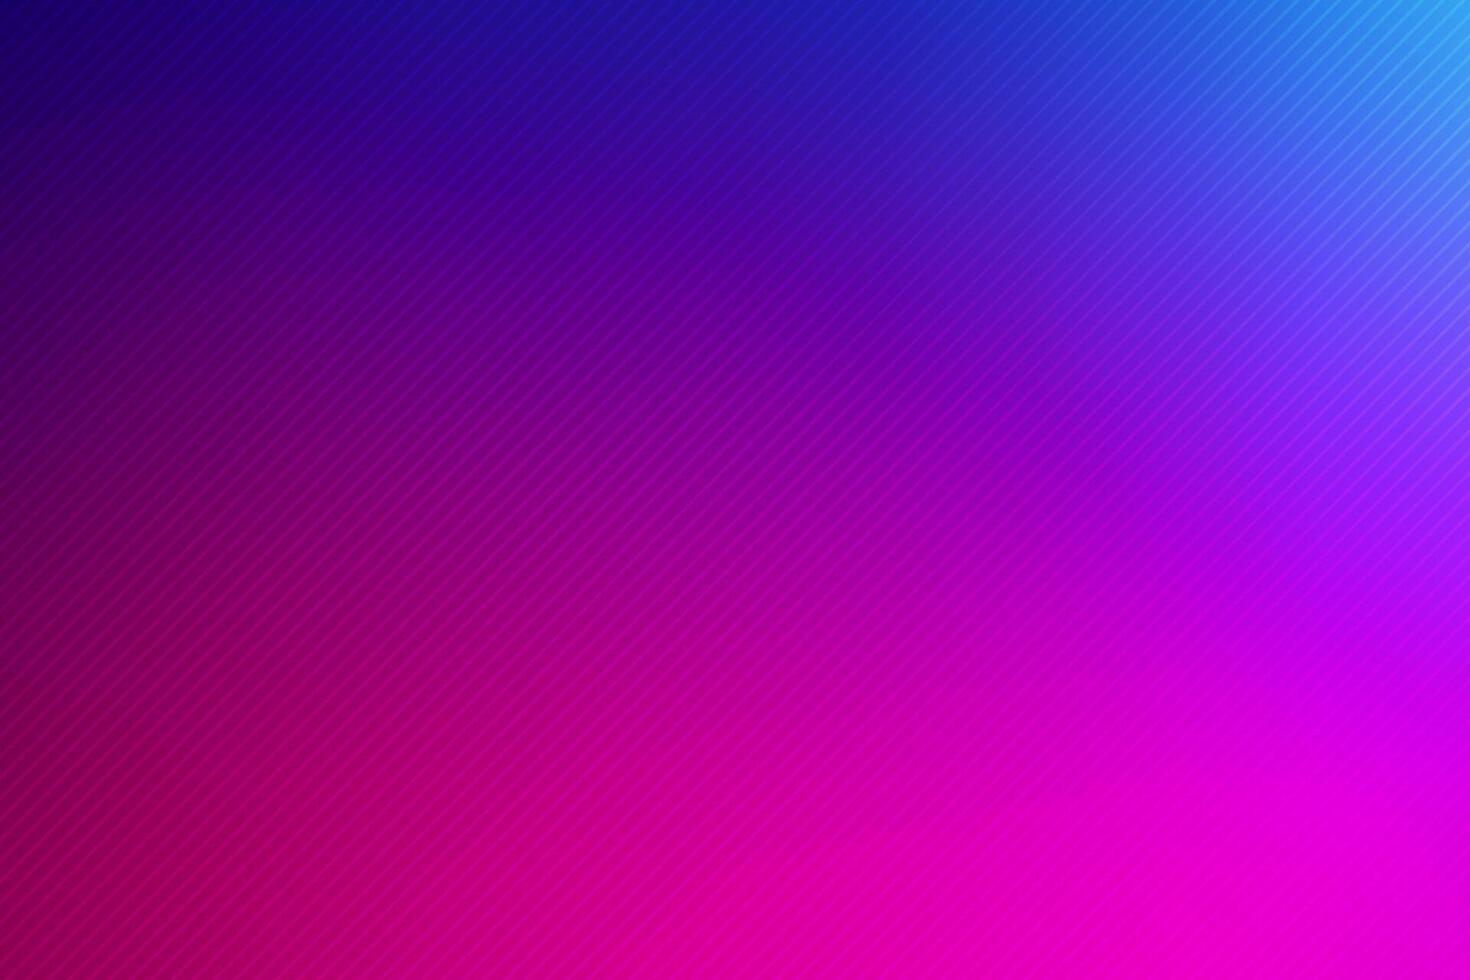 Blurry Colorful Noise Gradient Abstract Background vector